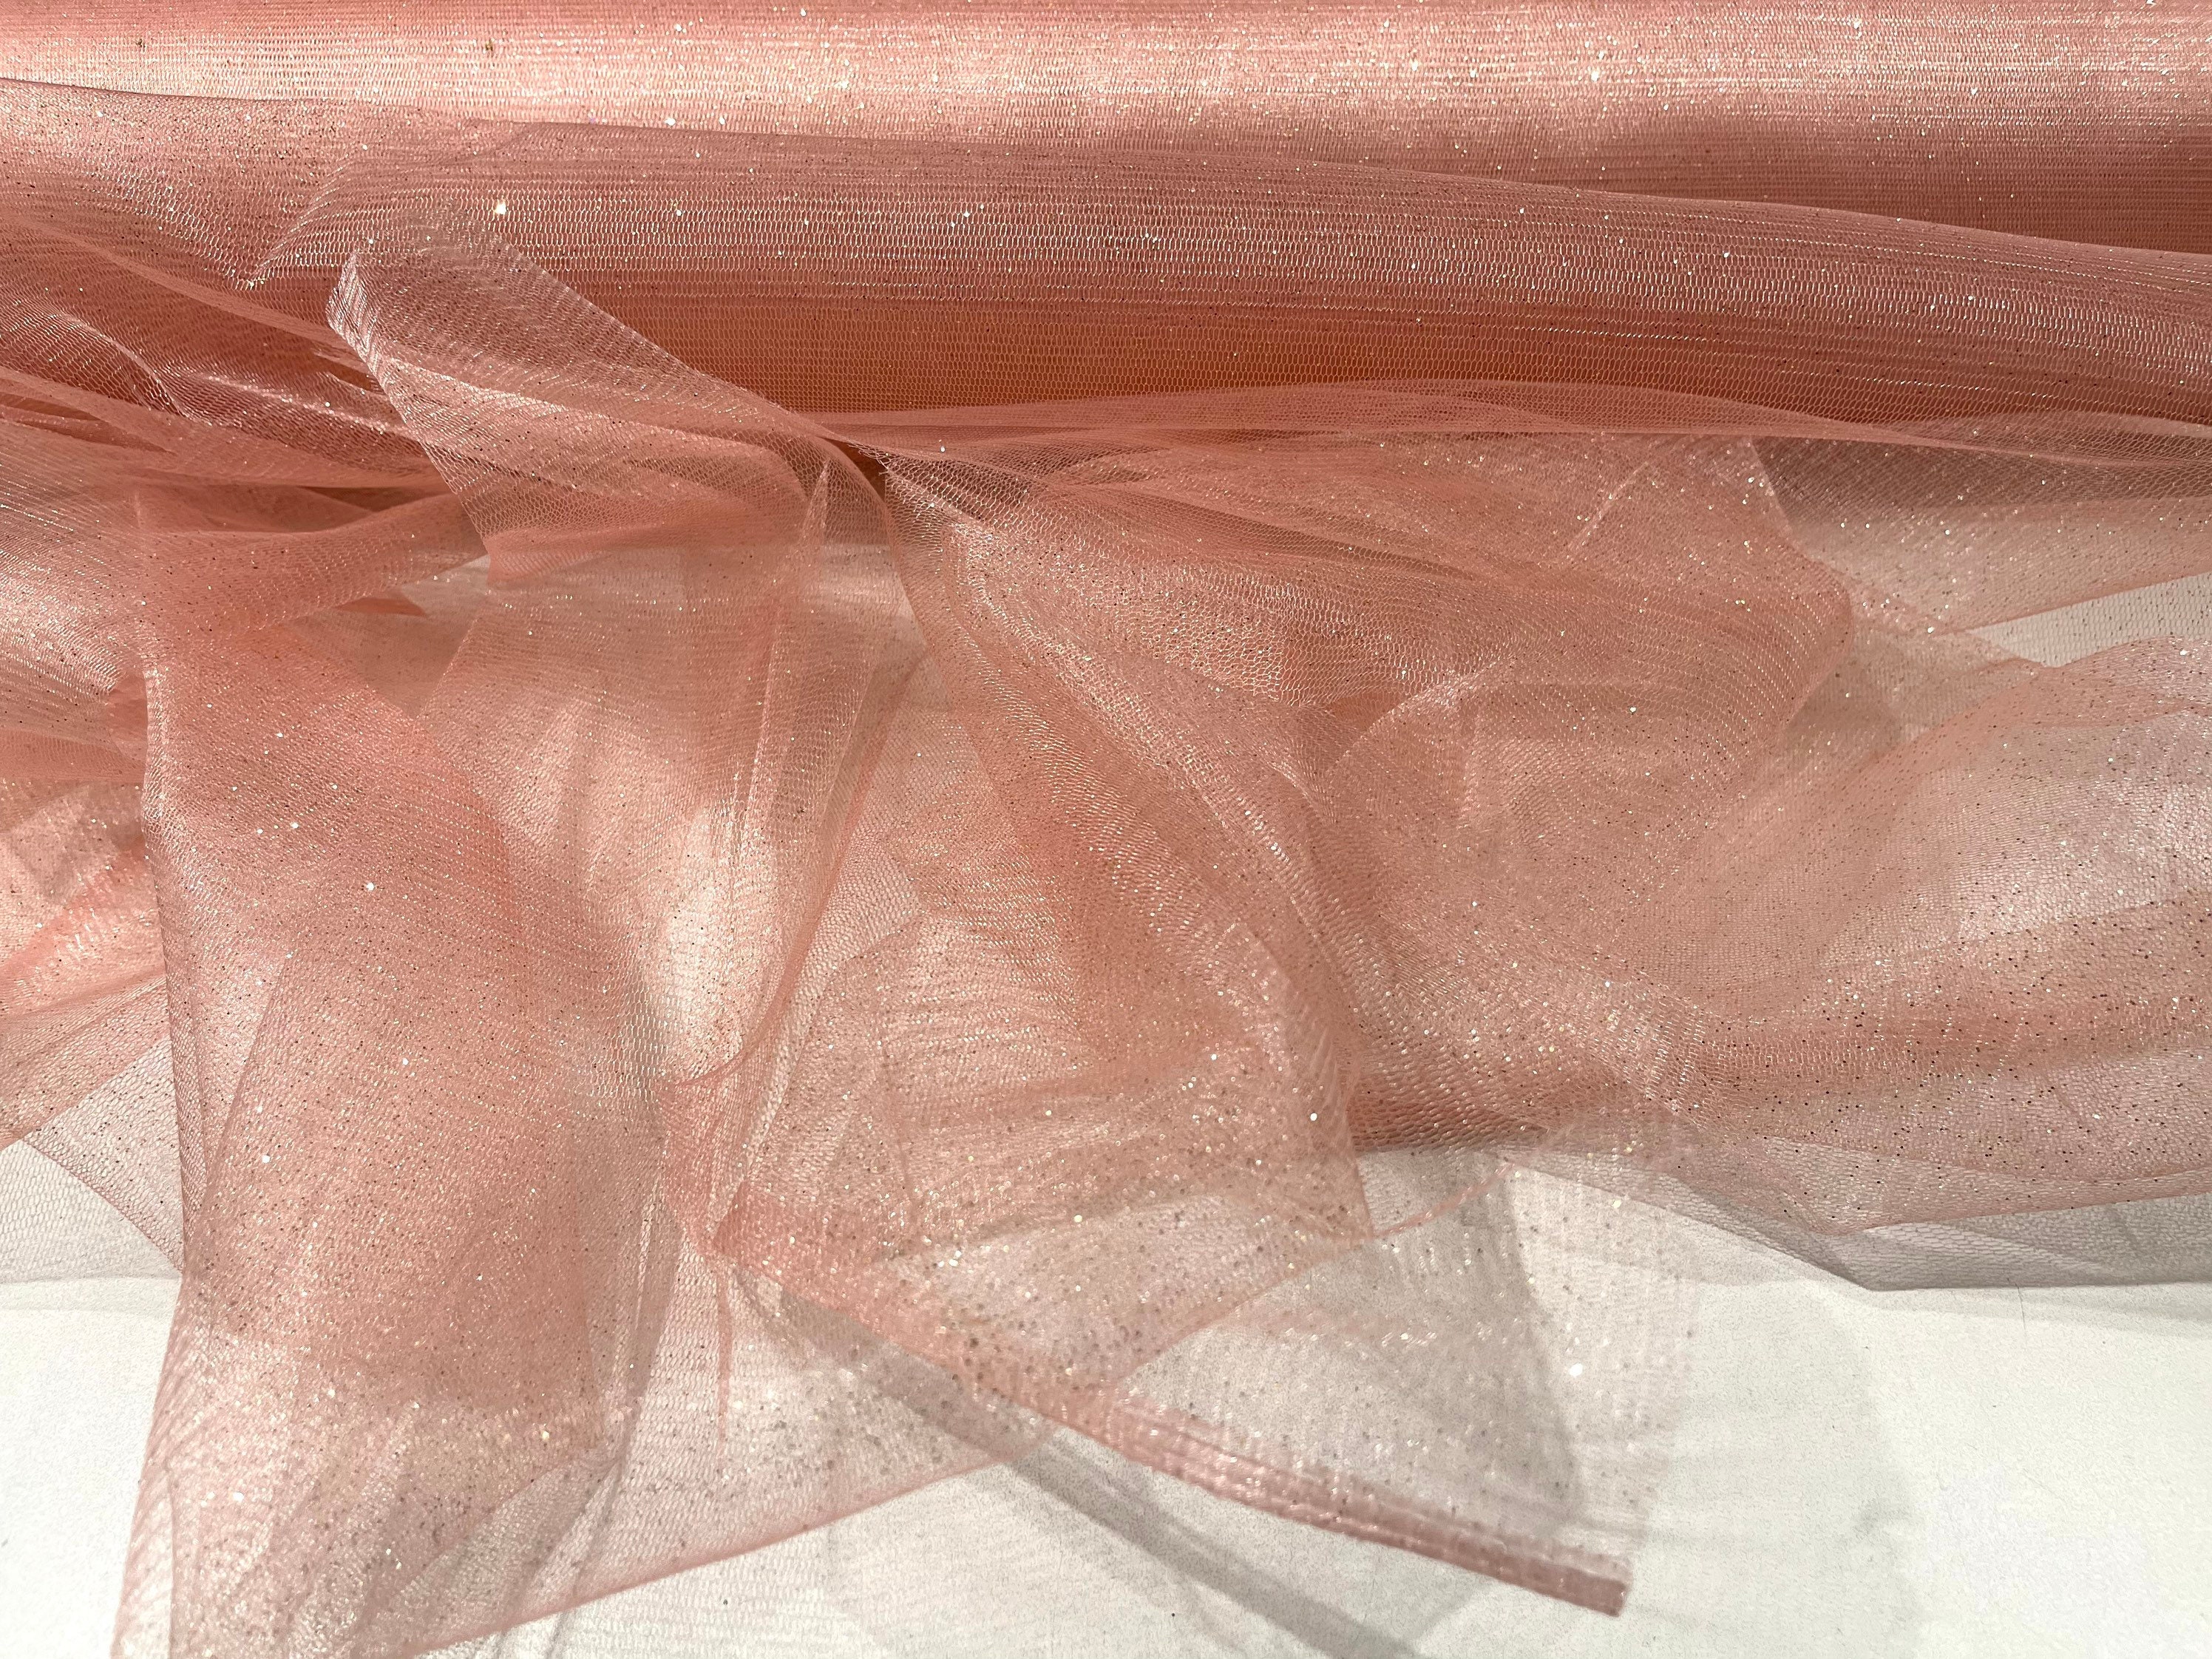 Sparkle Pink Tulle Fabric With Glitters for Dress, Tulle With Shimmer for  Costume, Wedding Decors, Prop, Backdrop -  Denmark